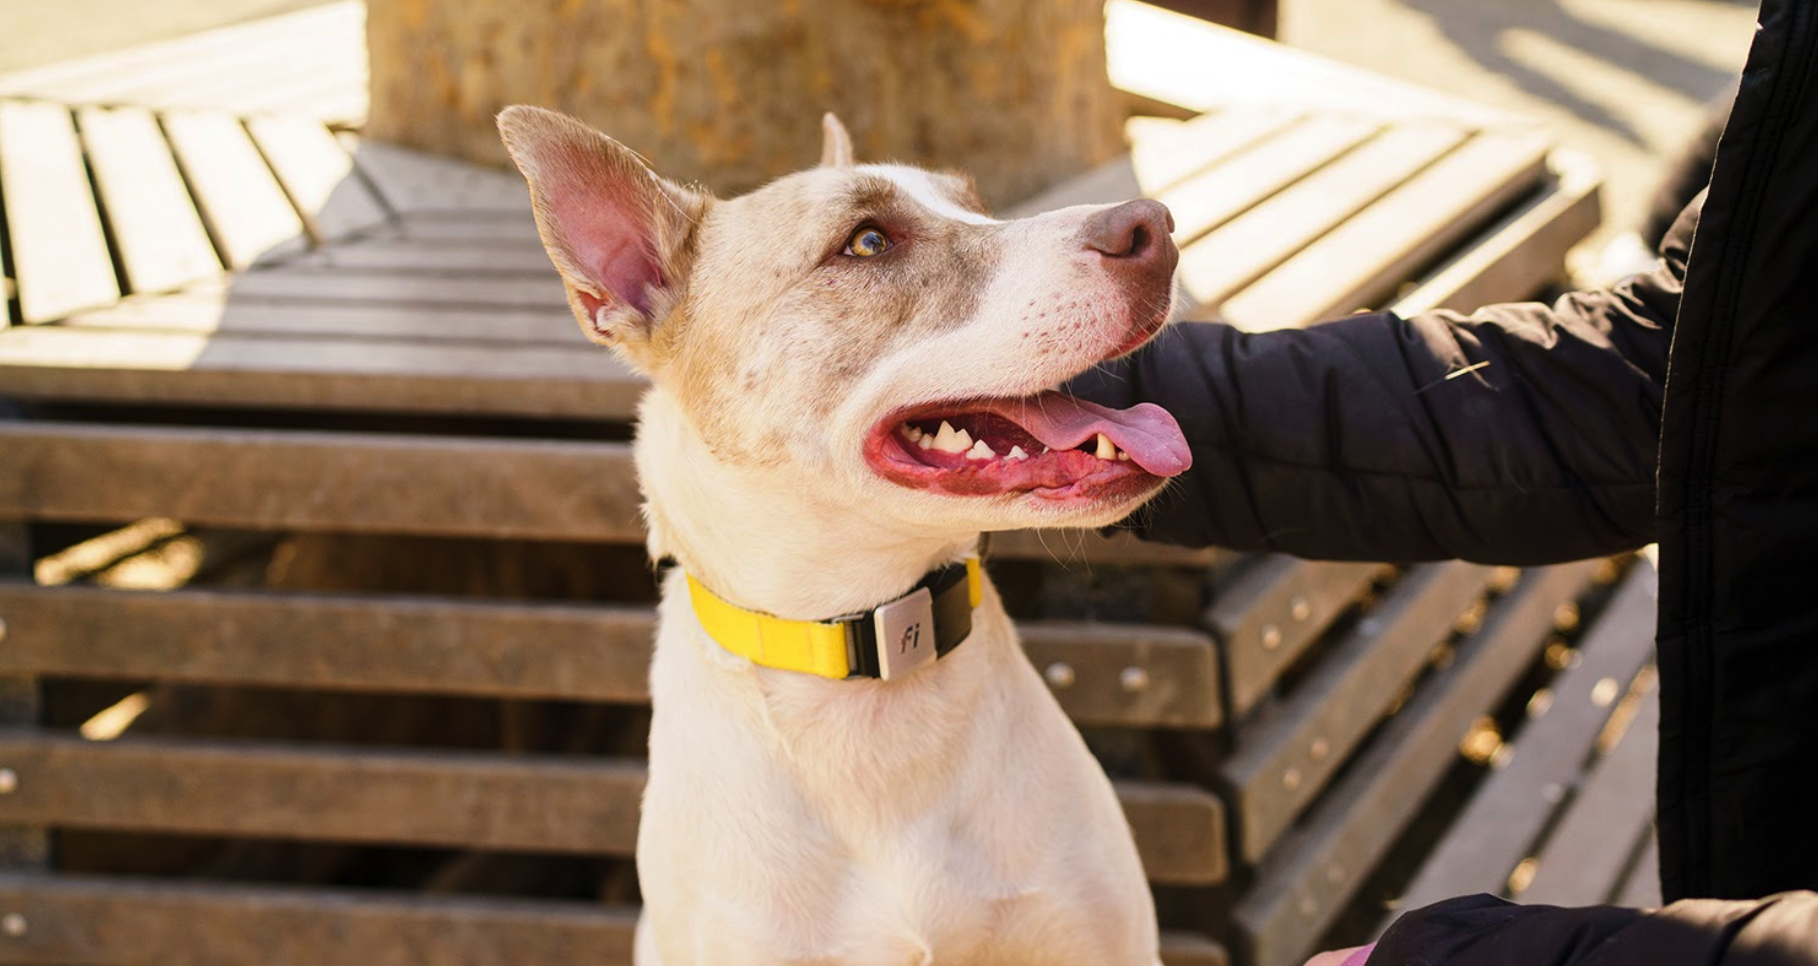 NYC Is Running Out Of Dogs To Adopt, And We Couldn’t Be Happier